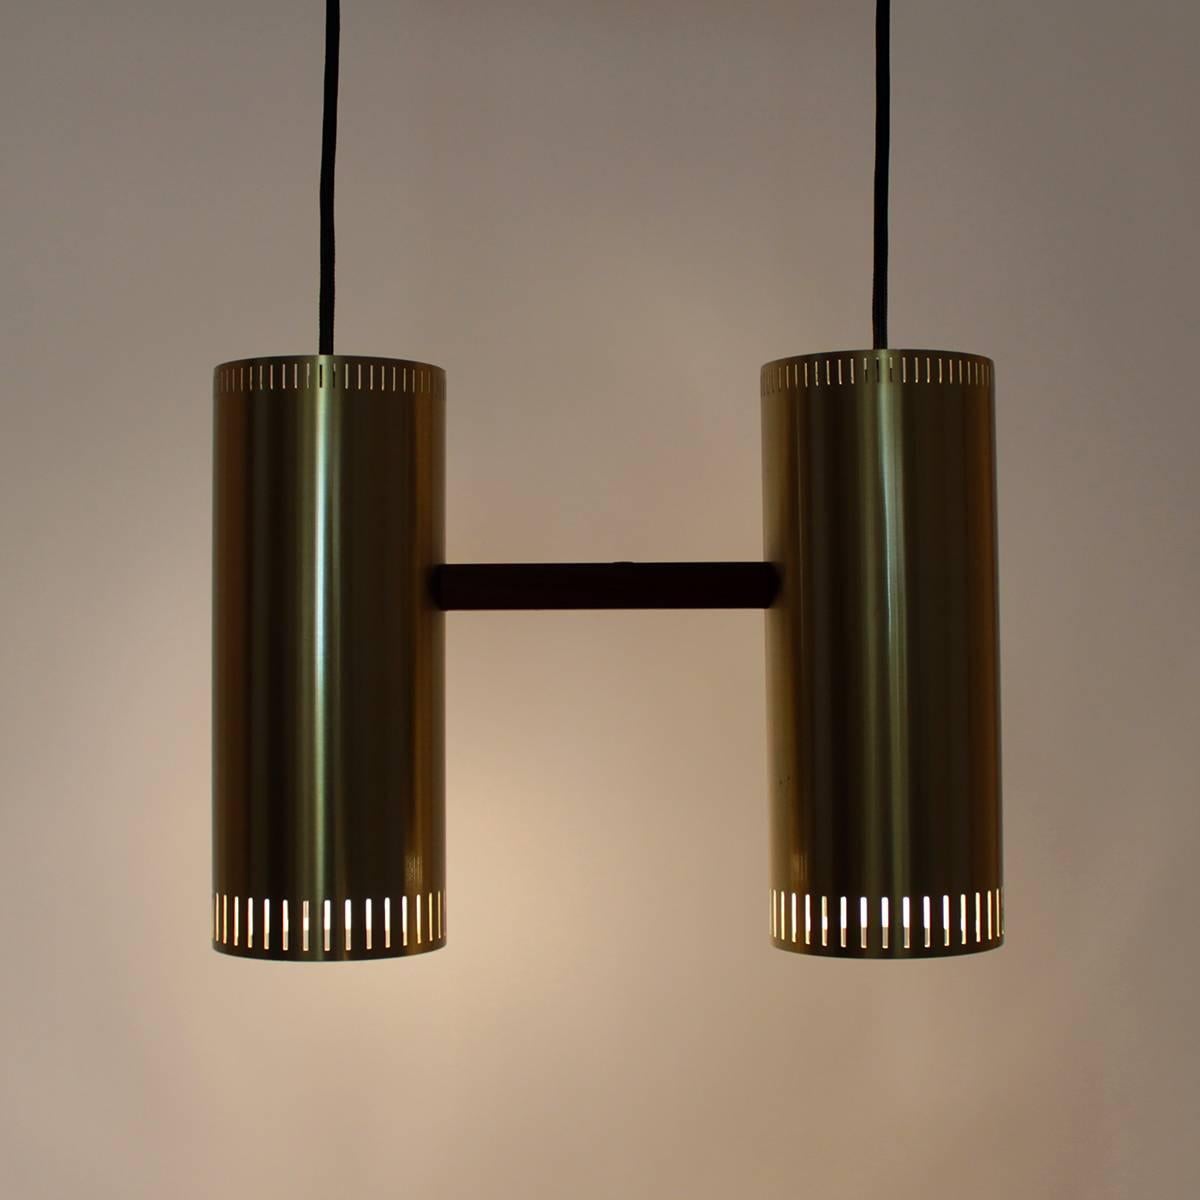 CYLINDER II, ceiling light designed by Jo Hammerborg, 1966 and produced by Fog & Morup - Rare brass light fixture with two individual pendants in good vintage condition.

The CYLINDER II is comprised of two identical cylindrical pendants with brass